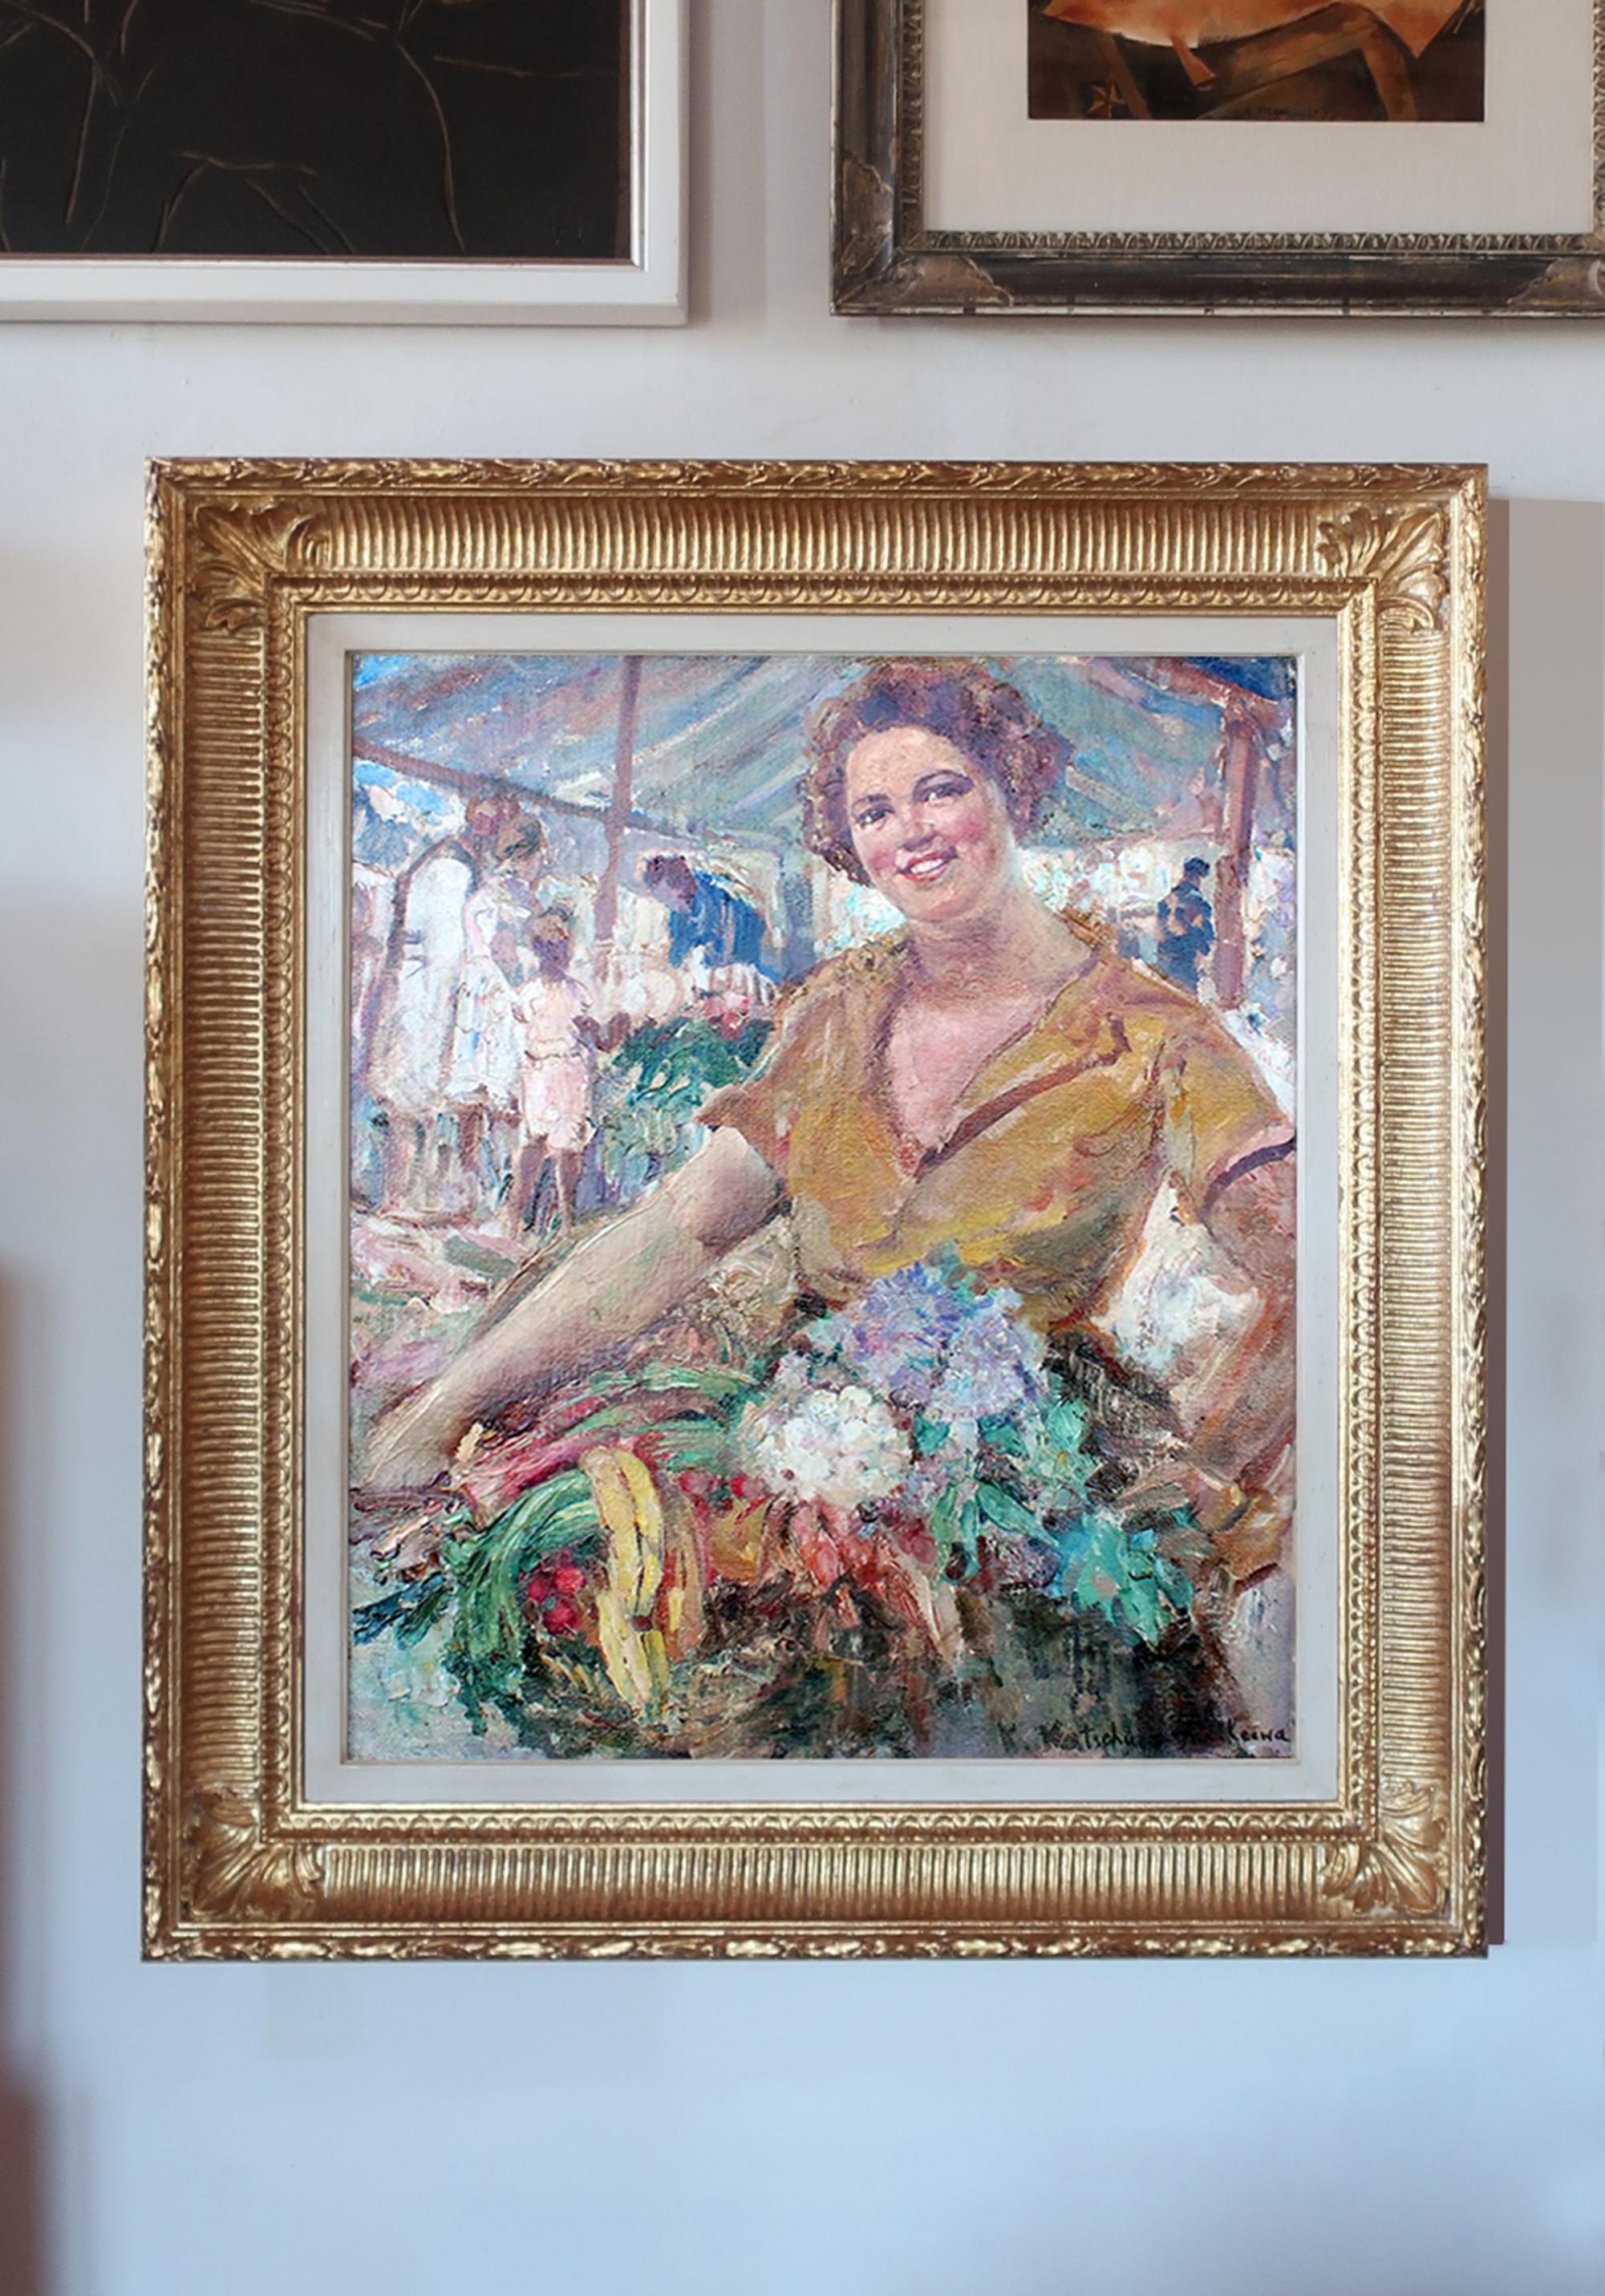 Stunning 1900s Russian impressionist female artwork with important results in the major auction houses worldwide. (Christie's, Sotheby's, Bonhams, Dorotheum, etc) 

Do your own research and see hammer prices reaching 18/38K everywhere. 
The perfect